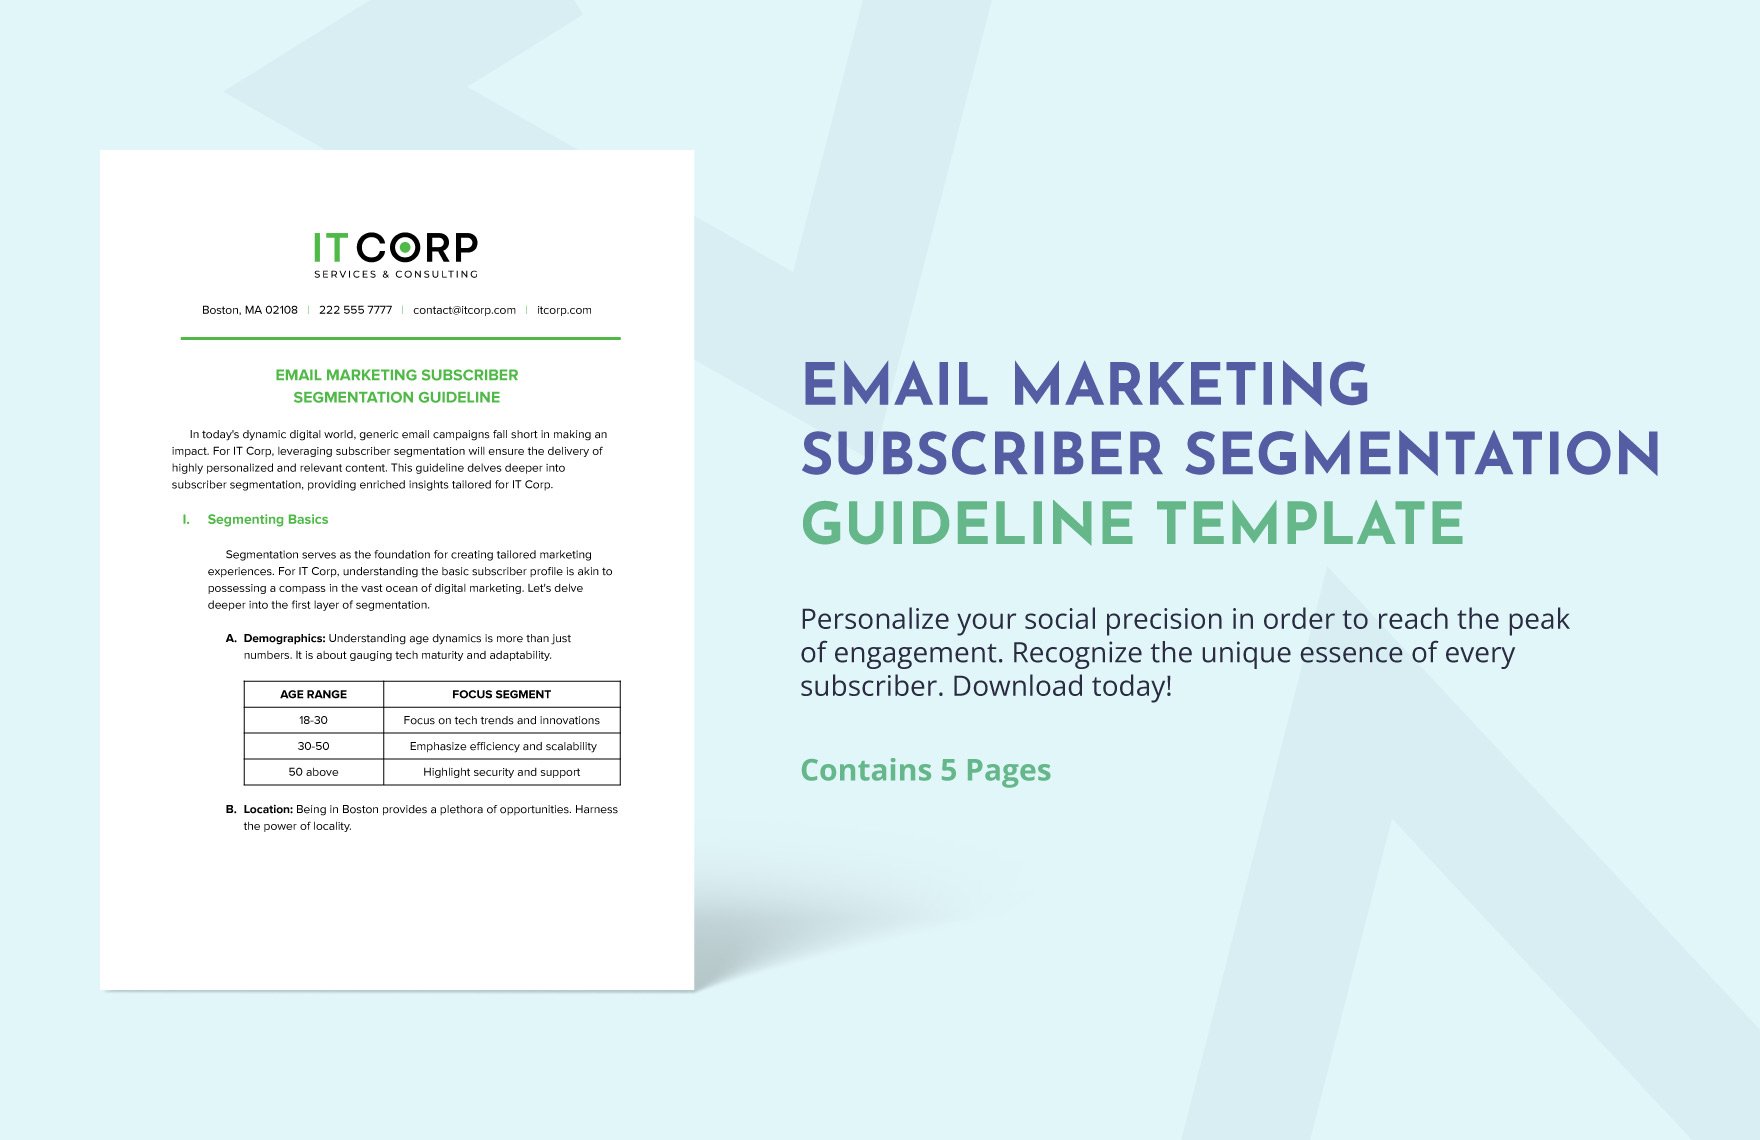 Email Marketing Subscriber Segmentation Guideline Template